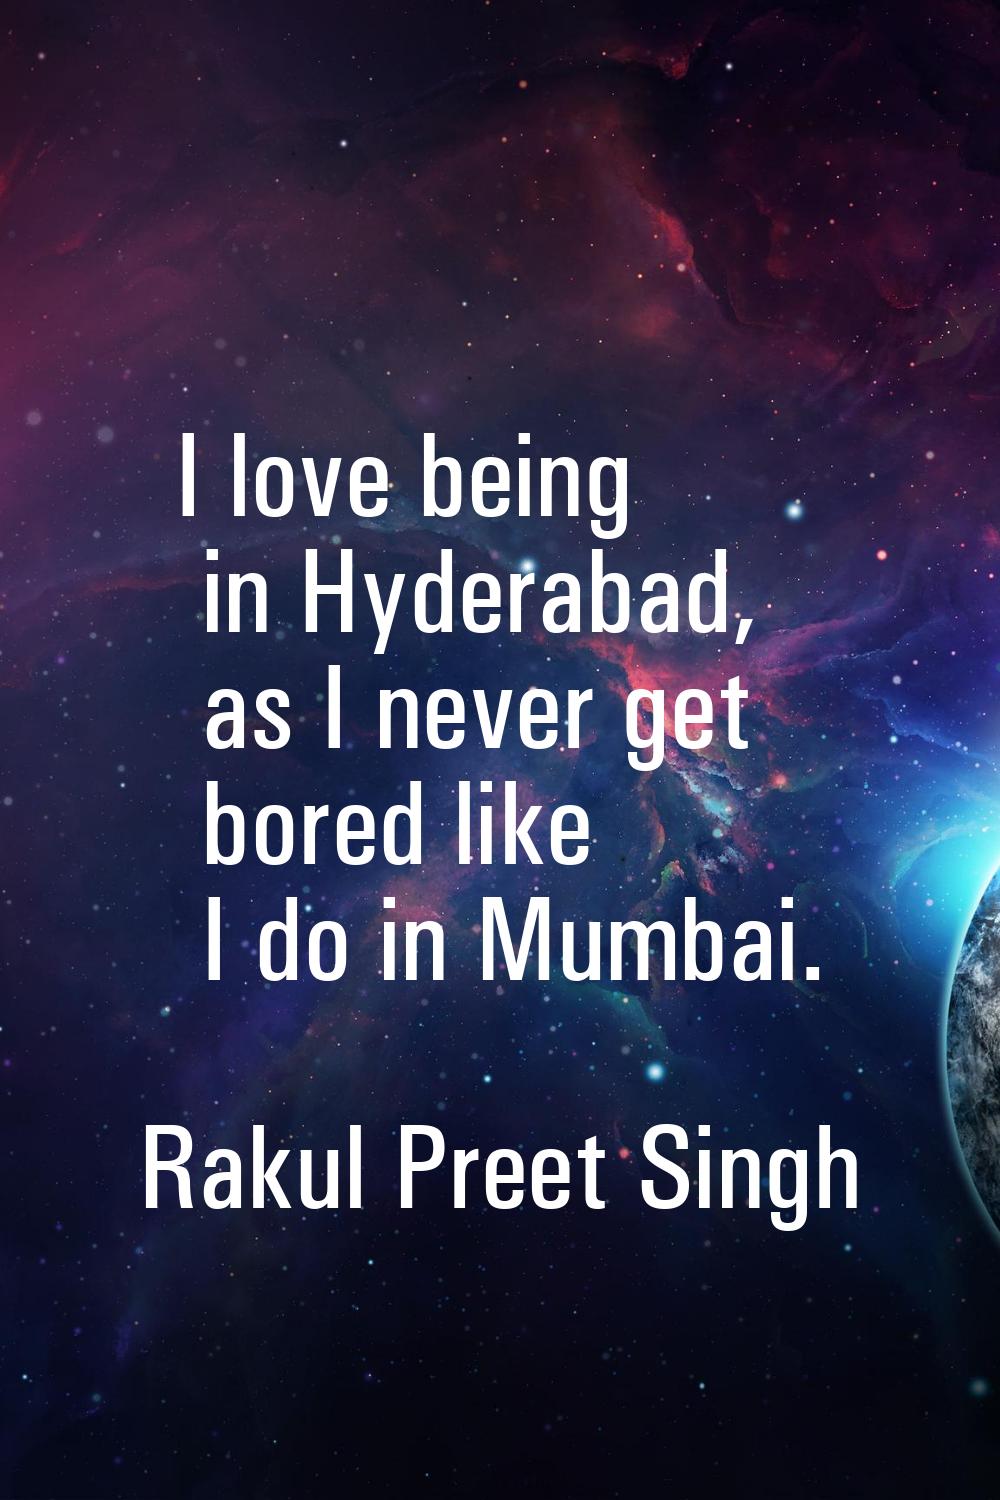 I love being in Hyderabad, as I never get bored like I do in Mumbai.